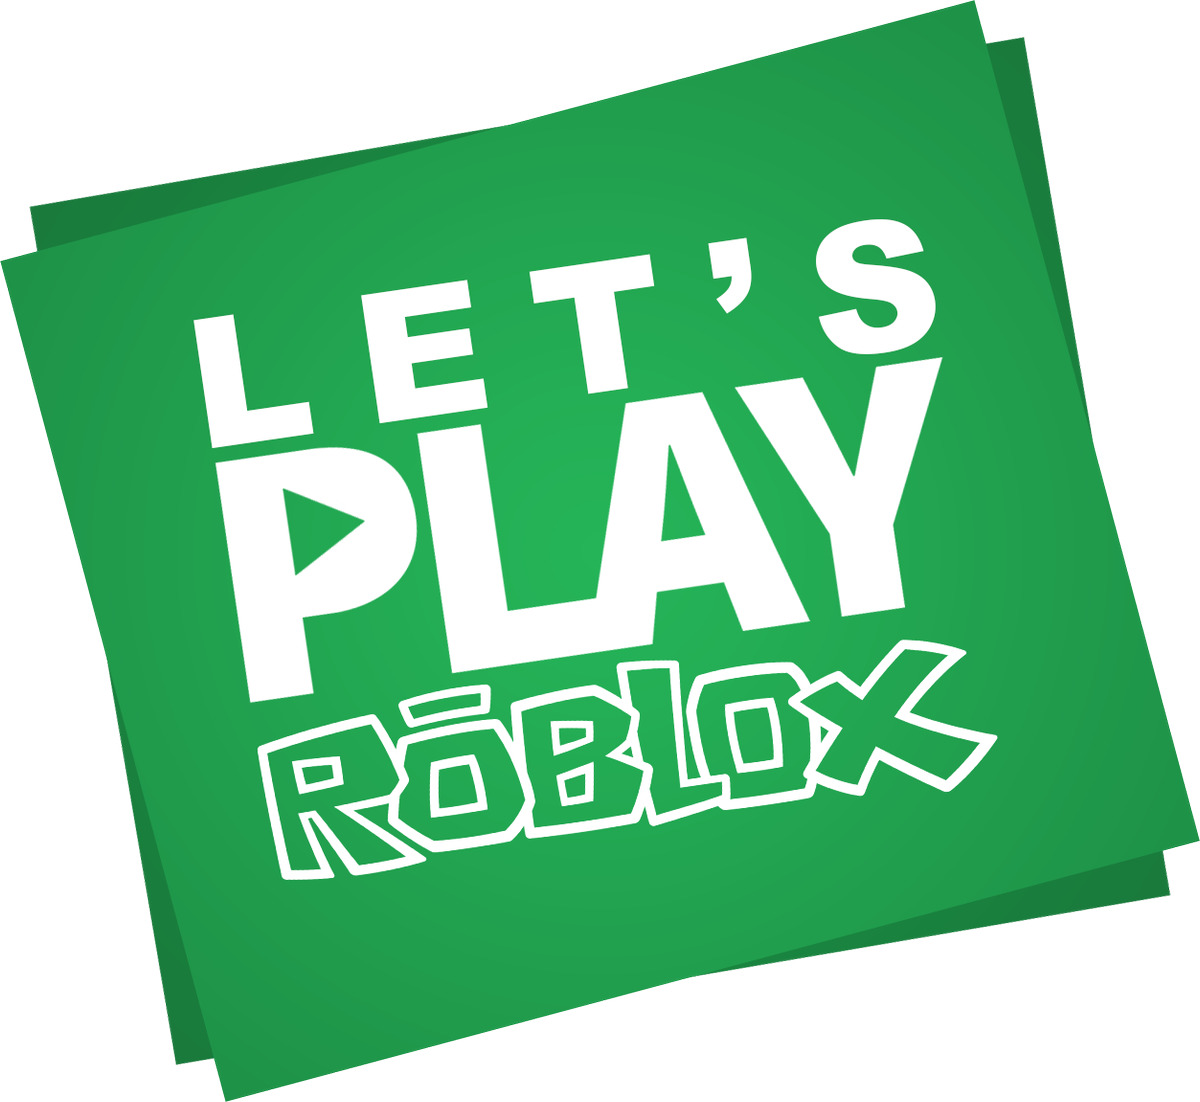 Hashtag Robloxgamespotlight Sur Twitter - roblox en twitter fly with us as we complete complex